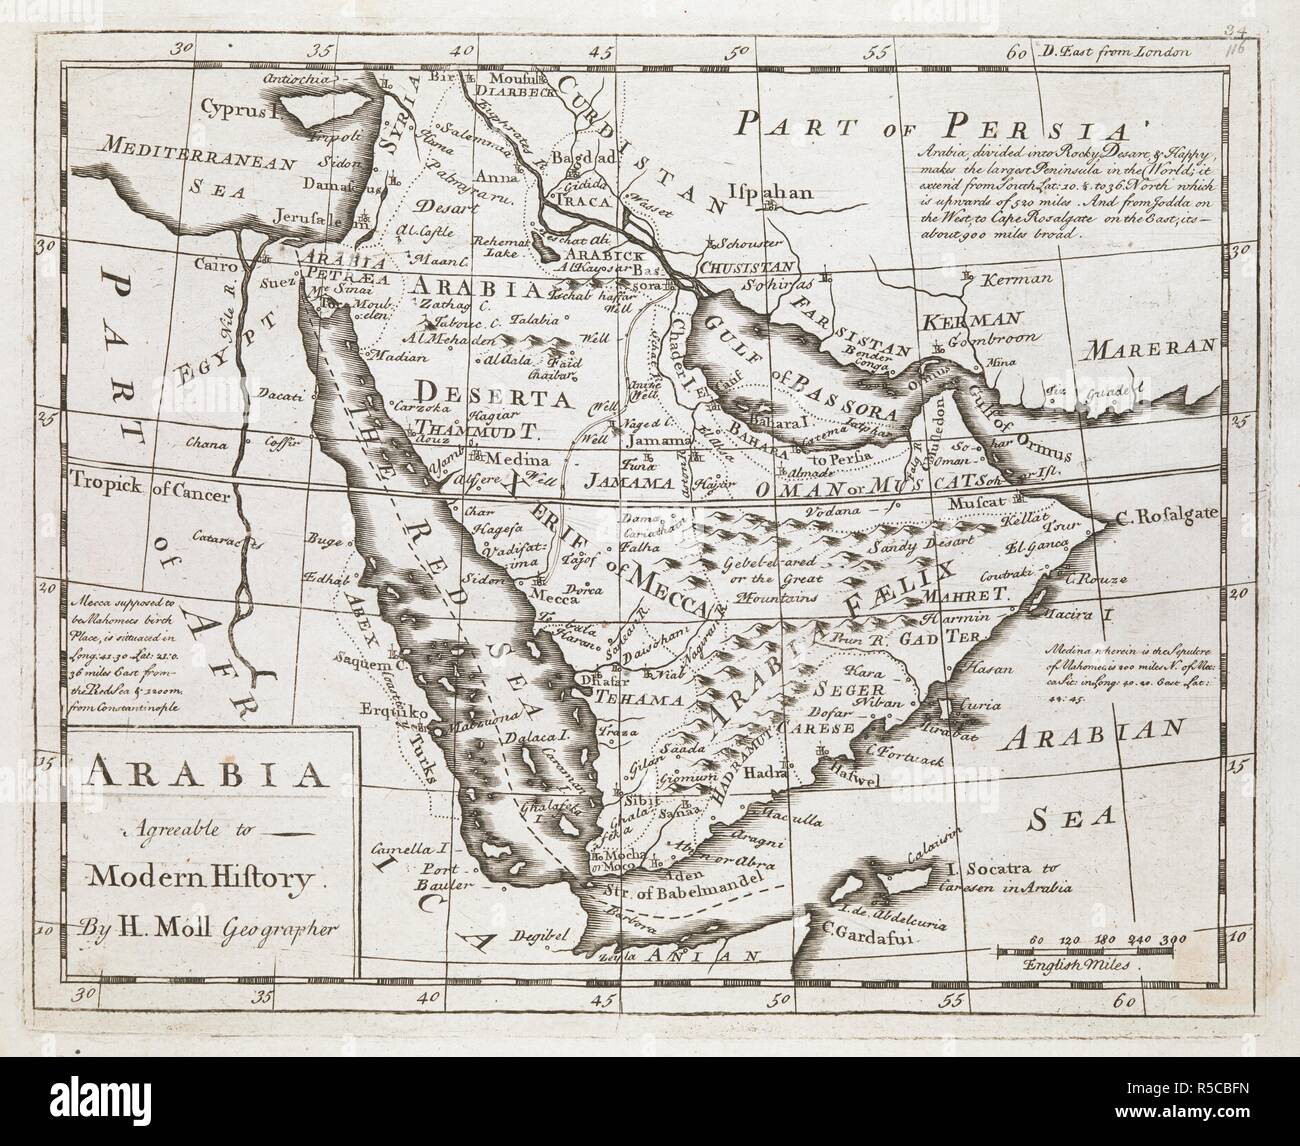 A map of Arabia. Arabia agreeable to Modern History. London, 1715?. Source: Maps K.Top.114.87. Language: English. Author: MOLL, HERMAN. Stock Photo